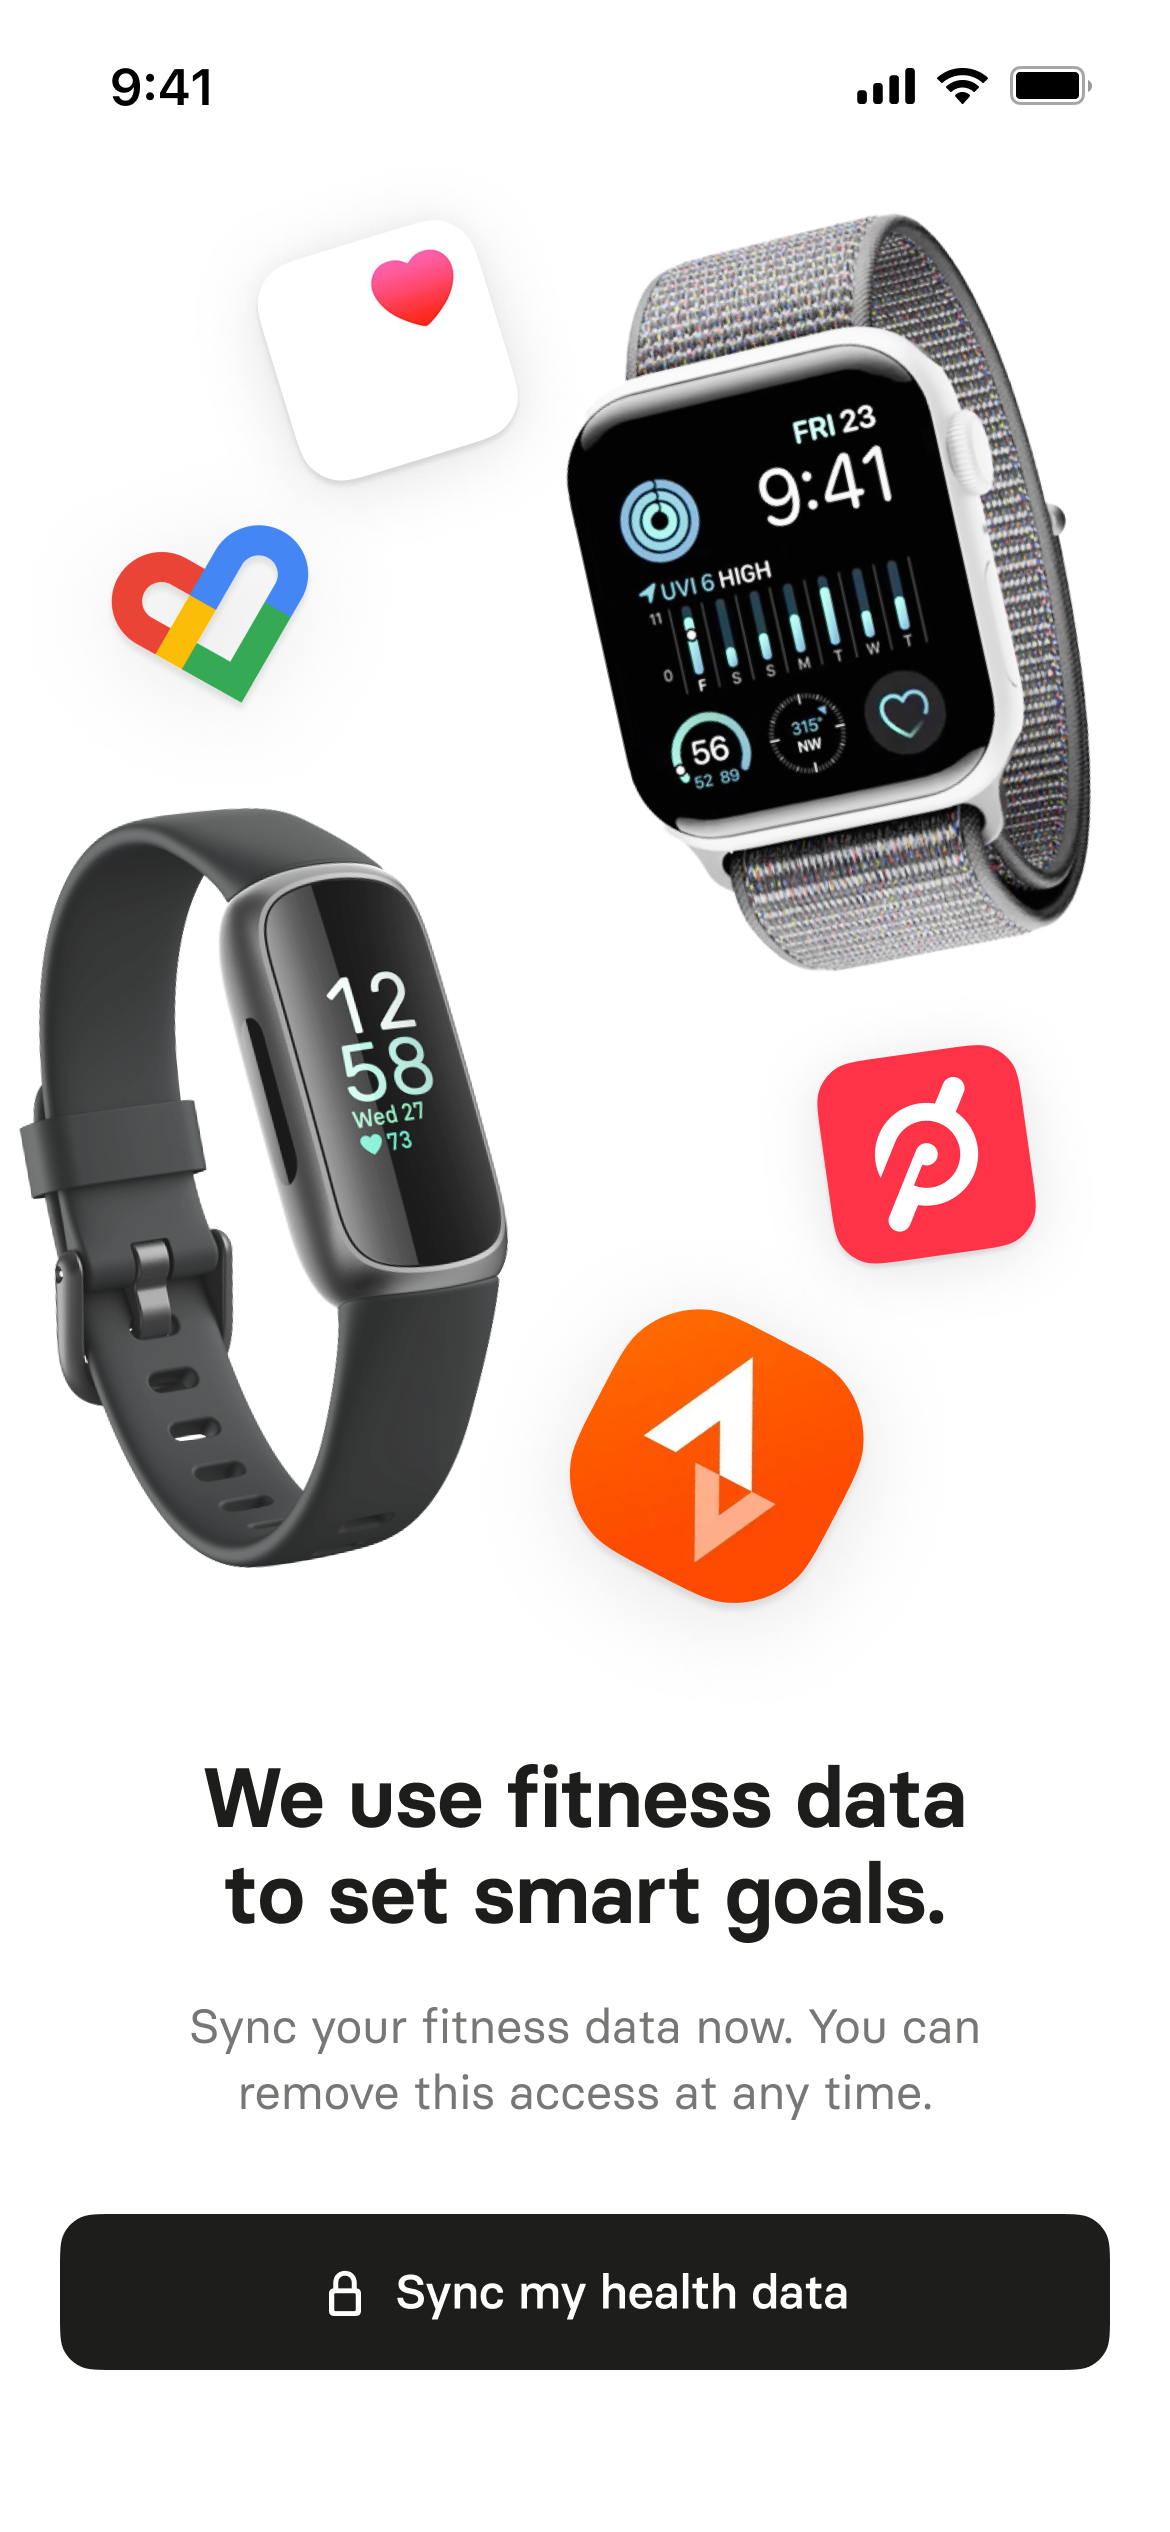 Fitness apps and wearables